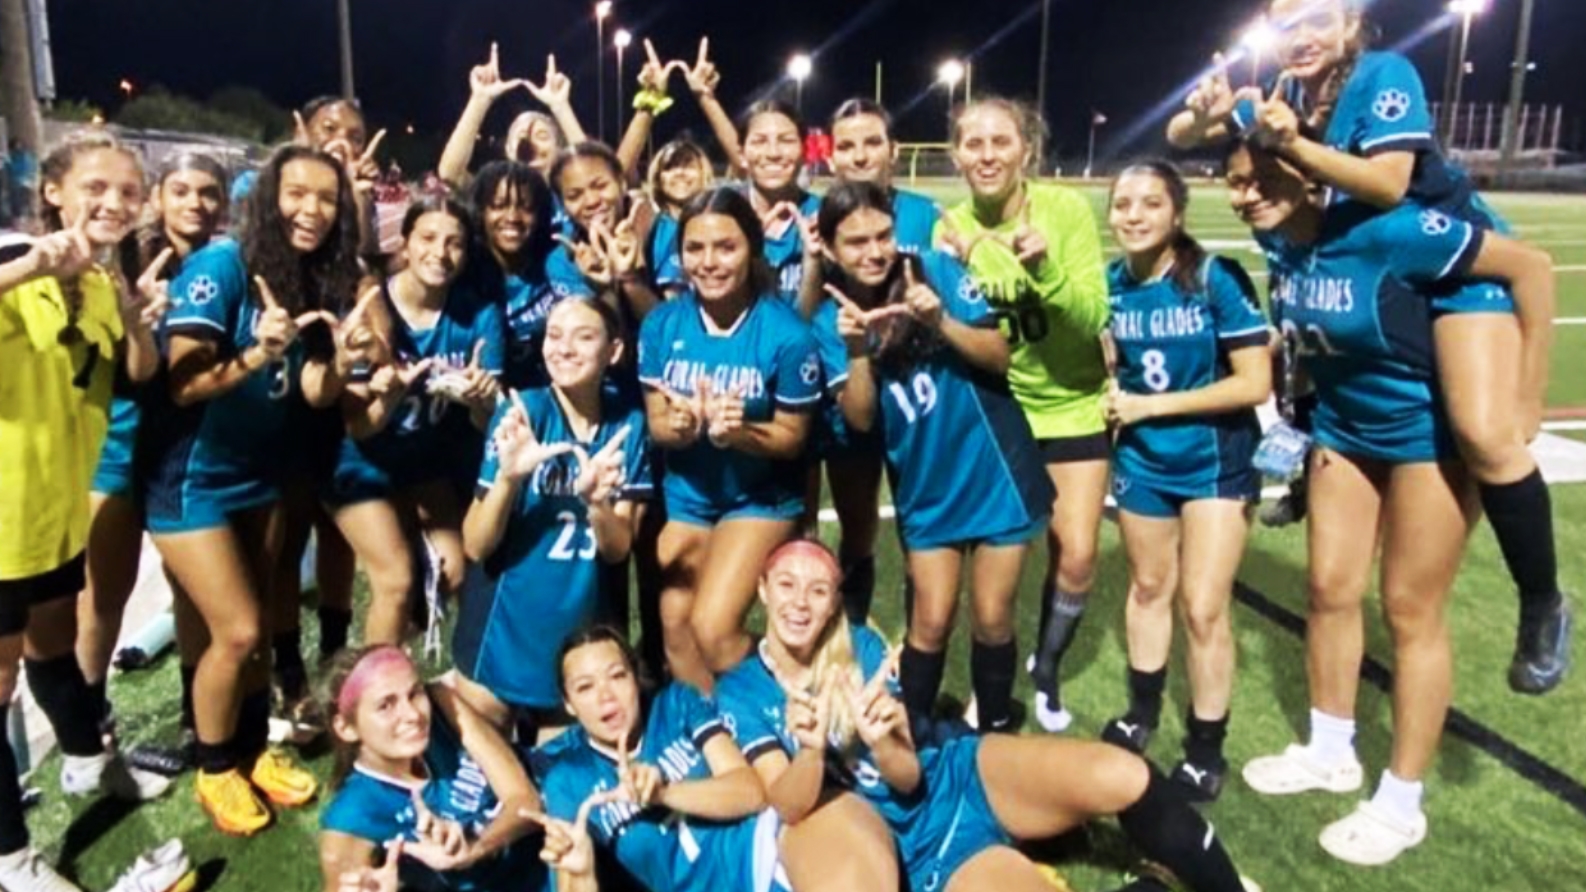 2 New Soccer Coaches at Coral Glades Pick Up 1st Win